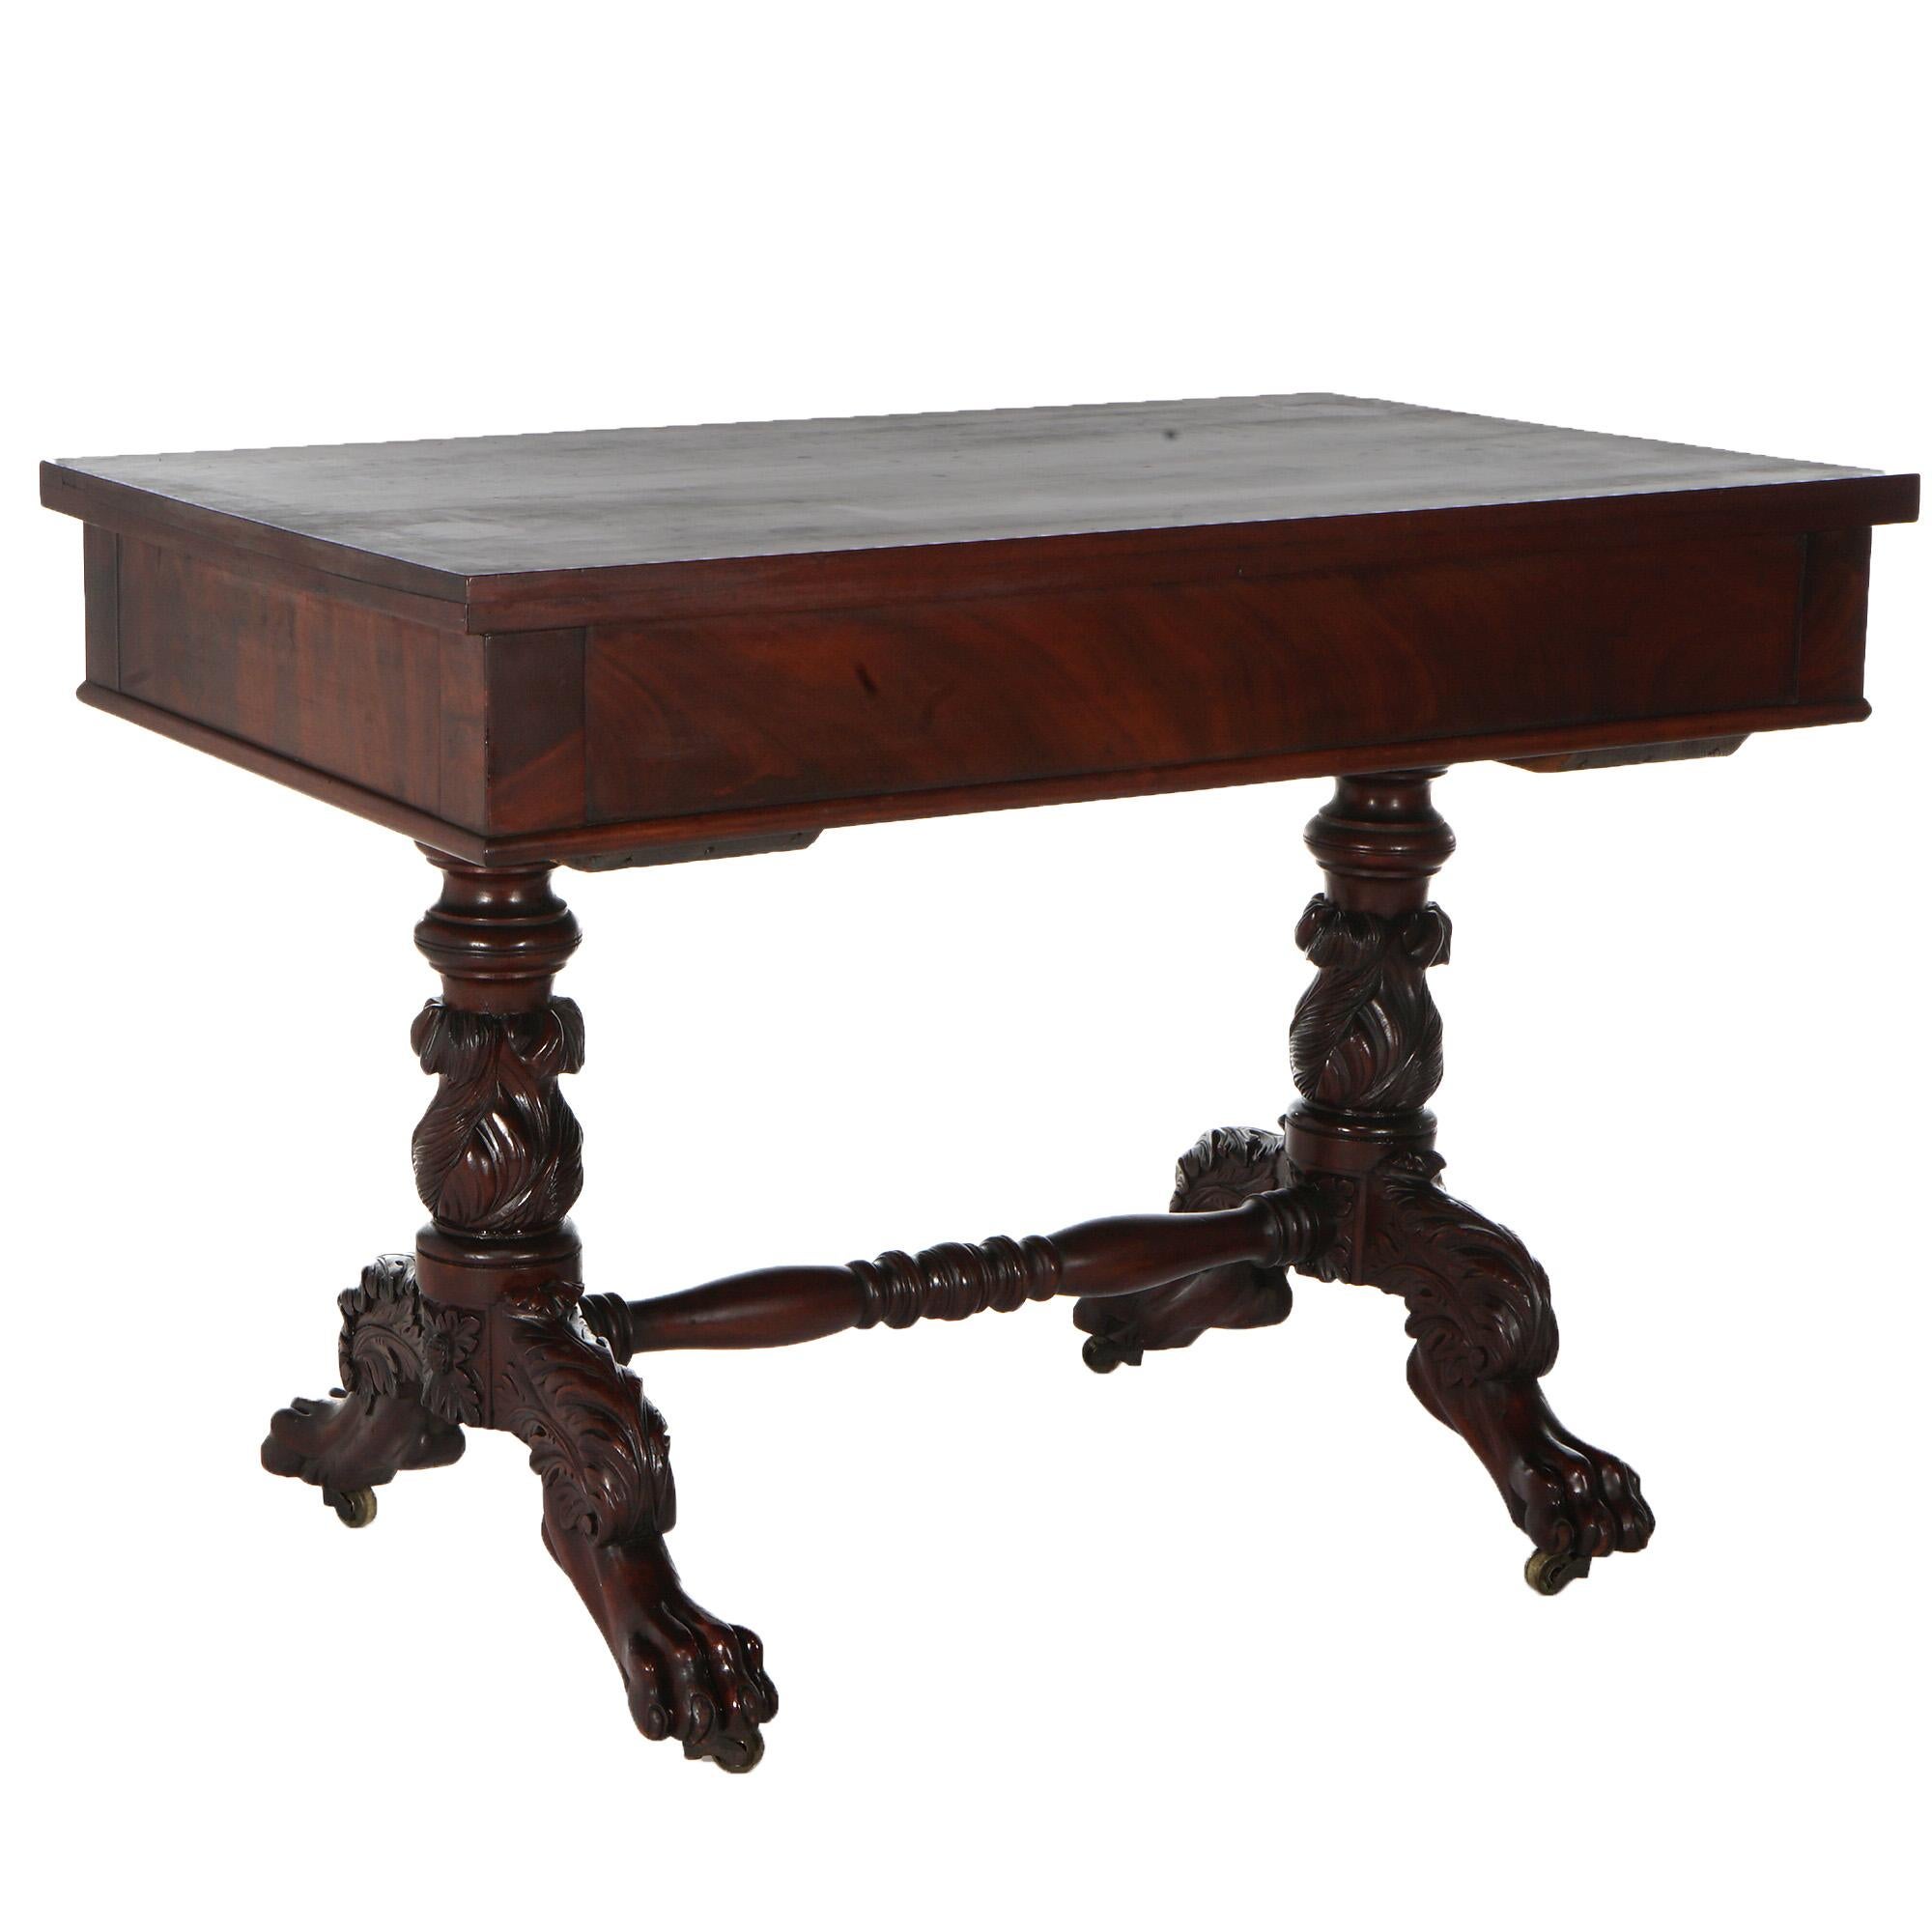 Antique American Empire Flame Mahogany Sofa Table, Carved Acanthus & Paws, C1840 For Sale 2